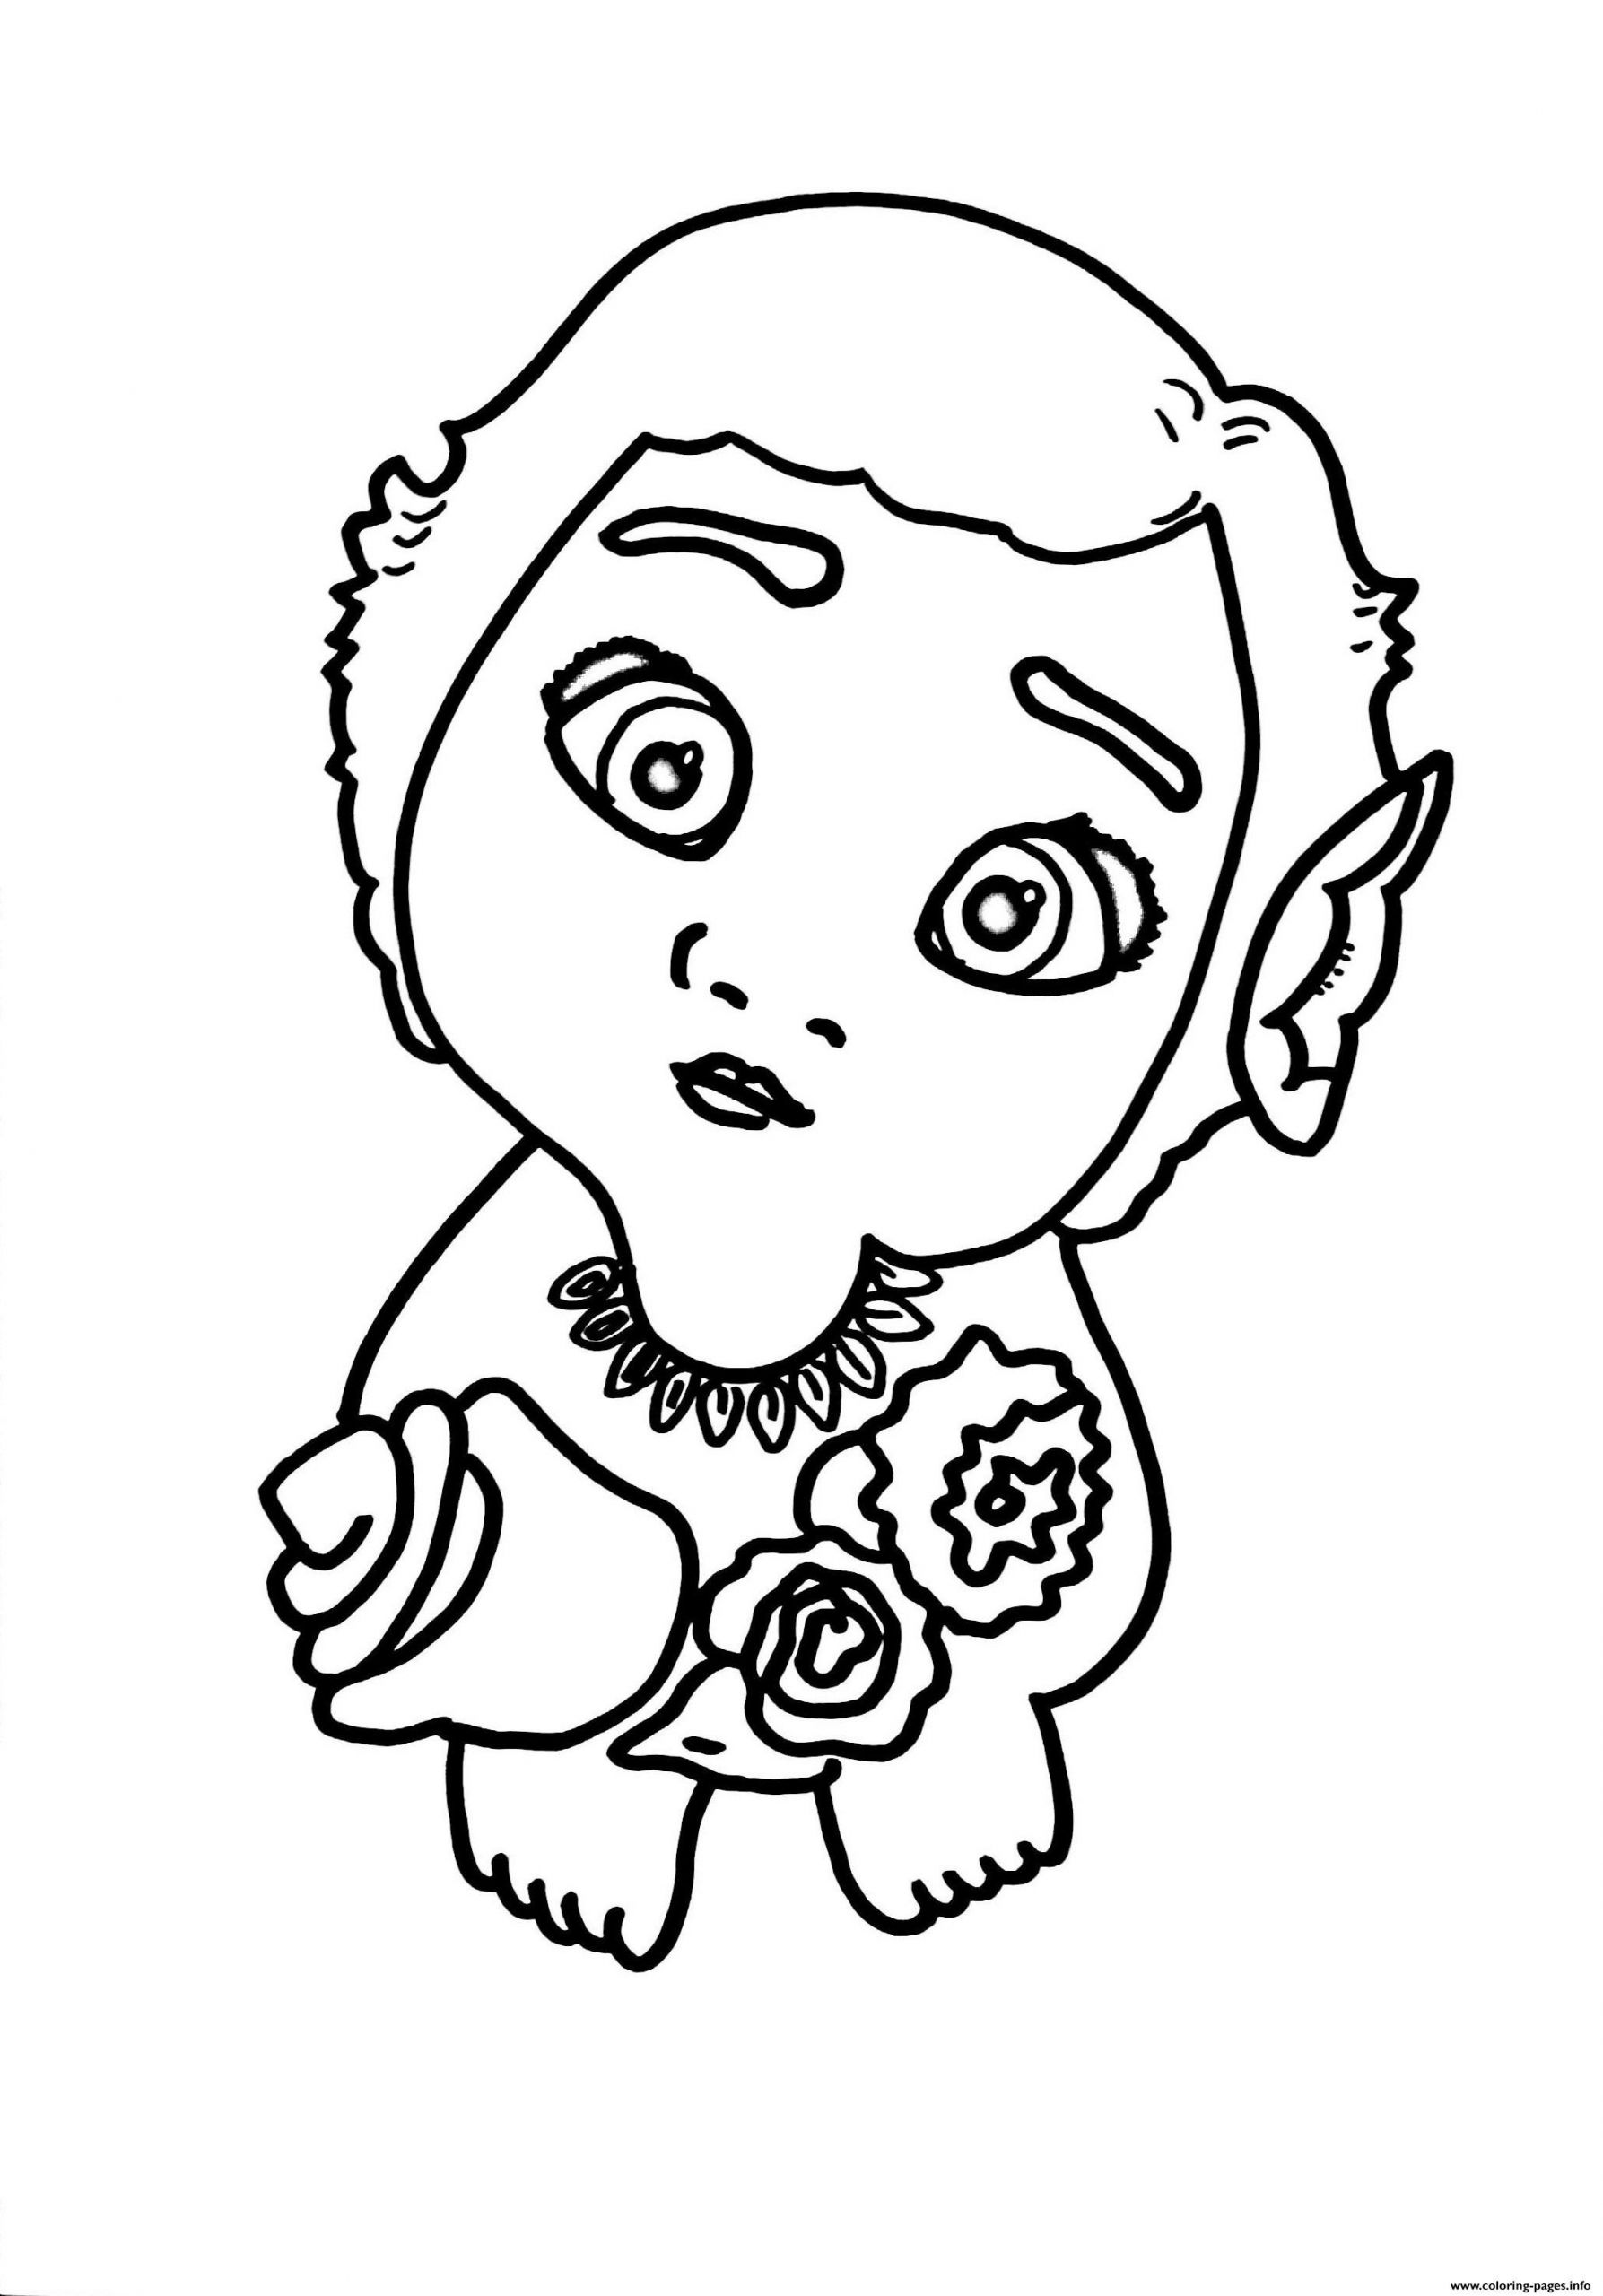 Baby Moana Coloring Page
 Baby Moana With Flowers Coloring Pages Printable